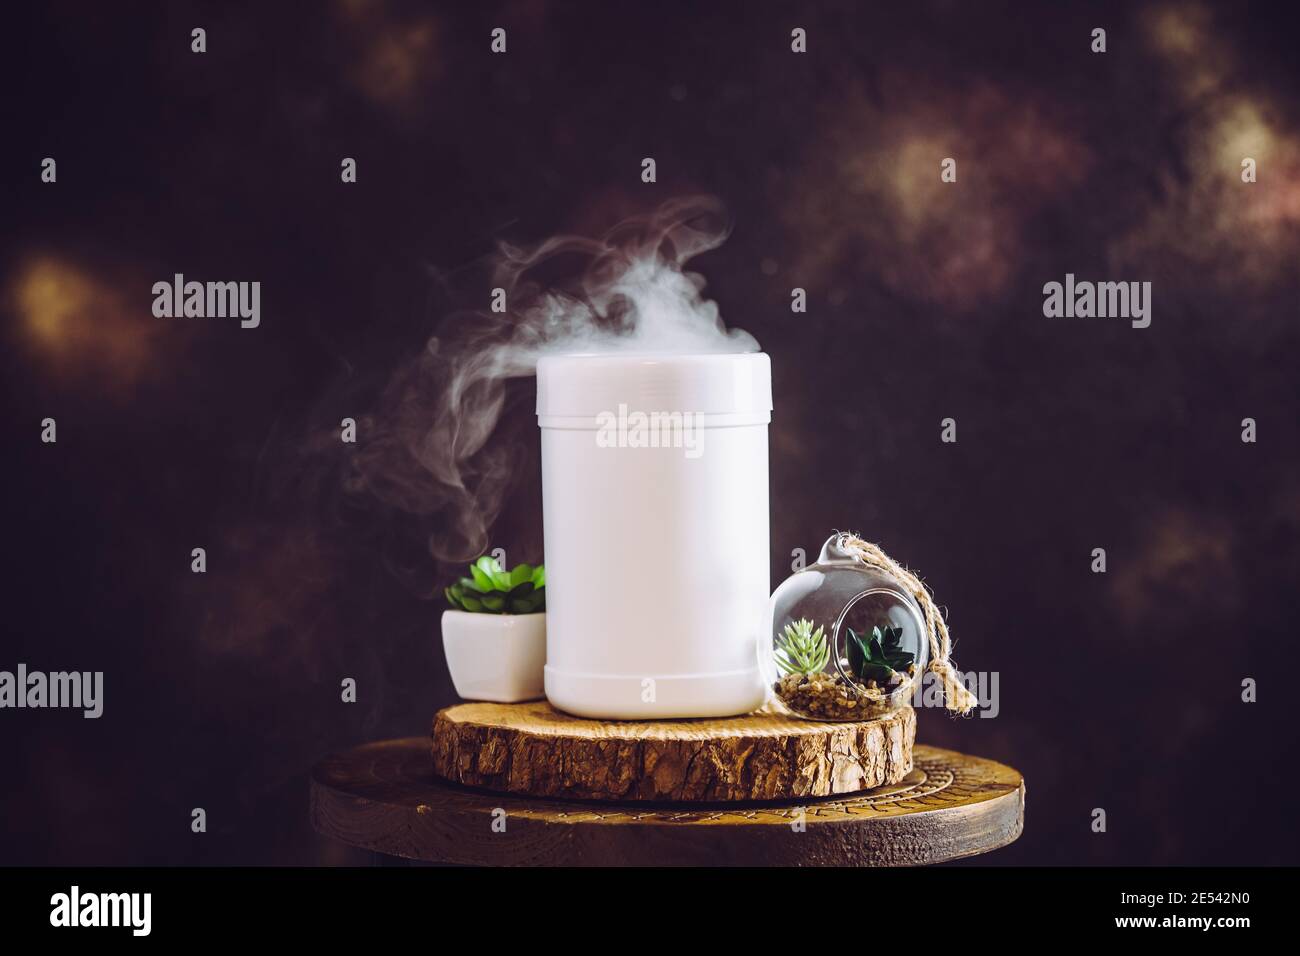 Humidifier adds water to the air by boiling water into steam. Reduces dry air, healthy home environment which can help relieve a stuffy nose. Stock Photo